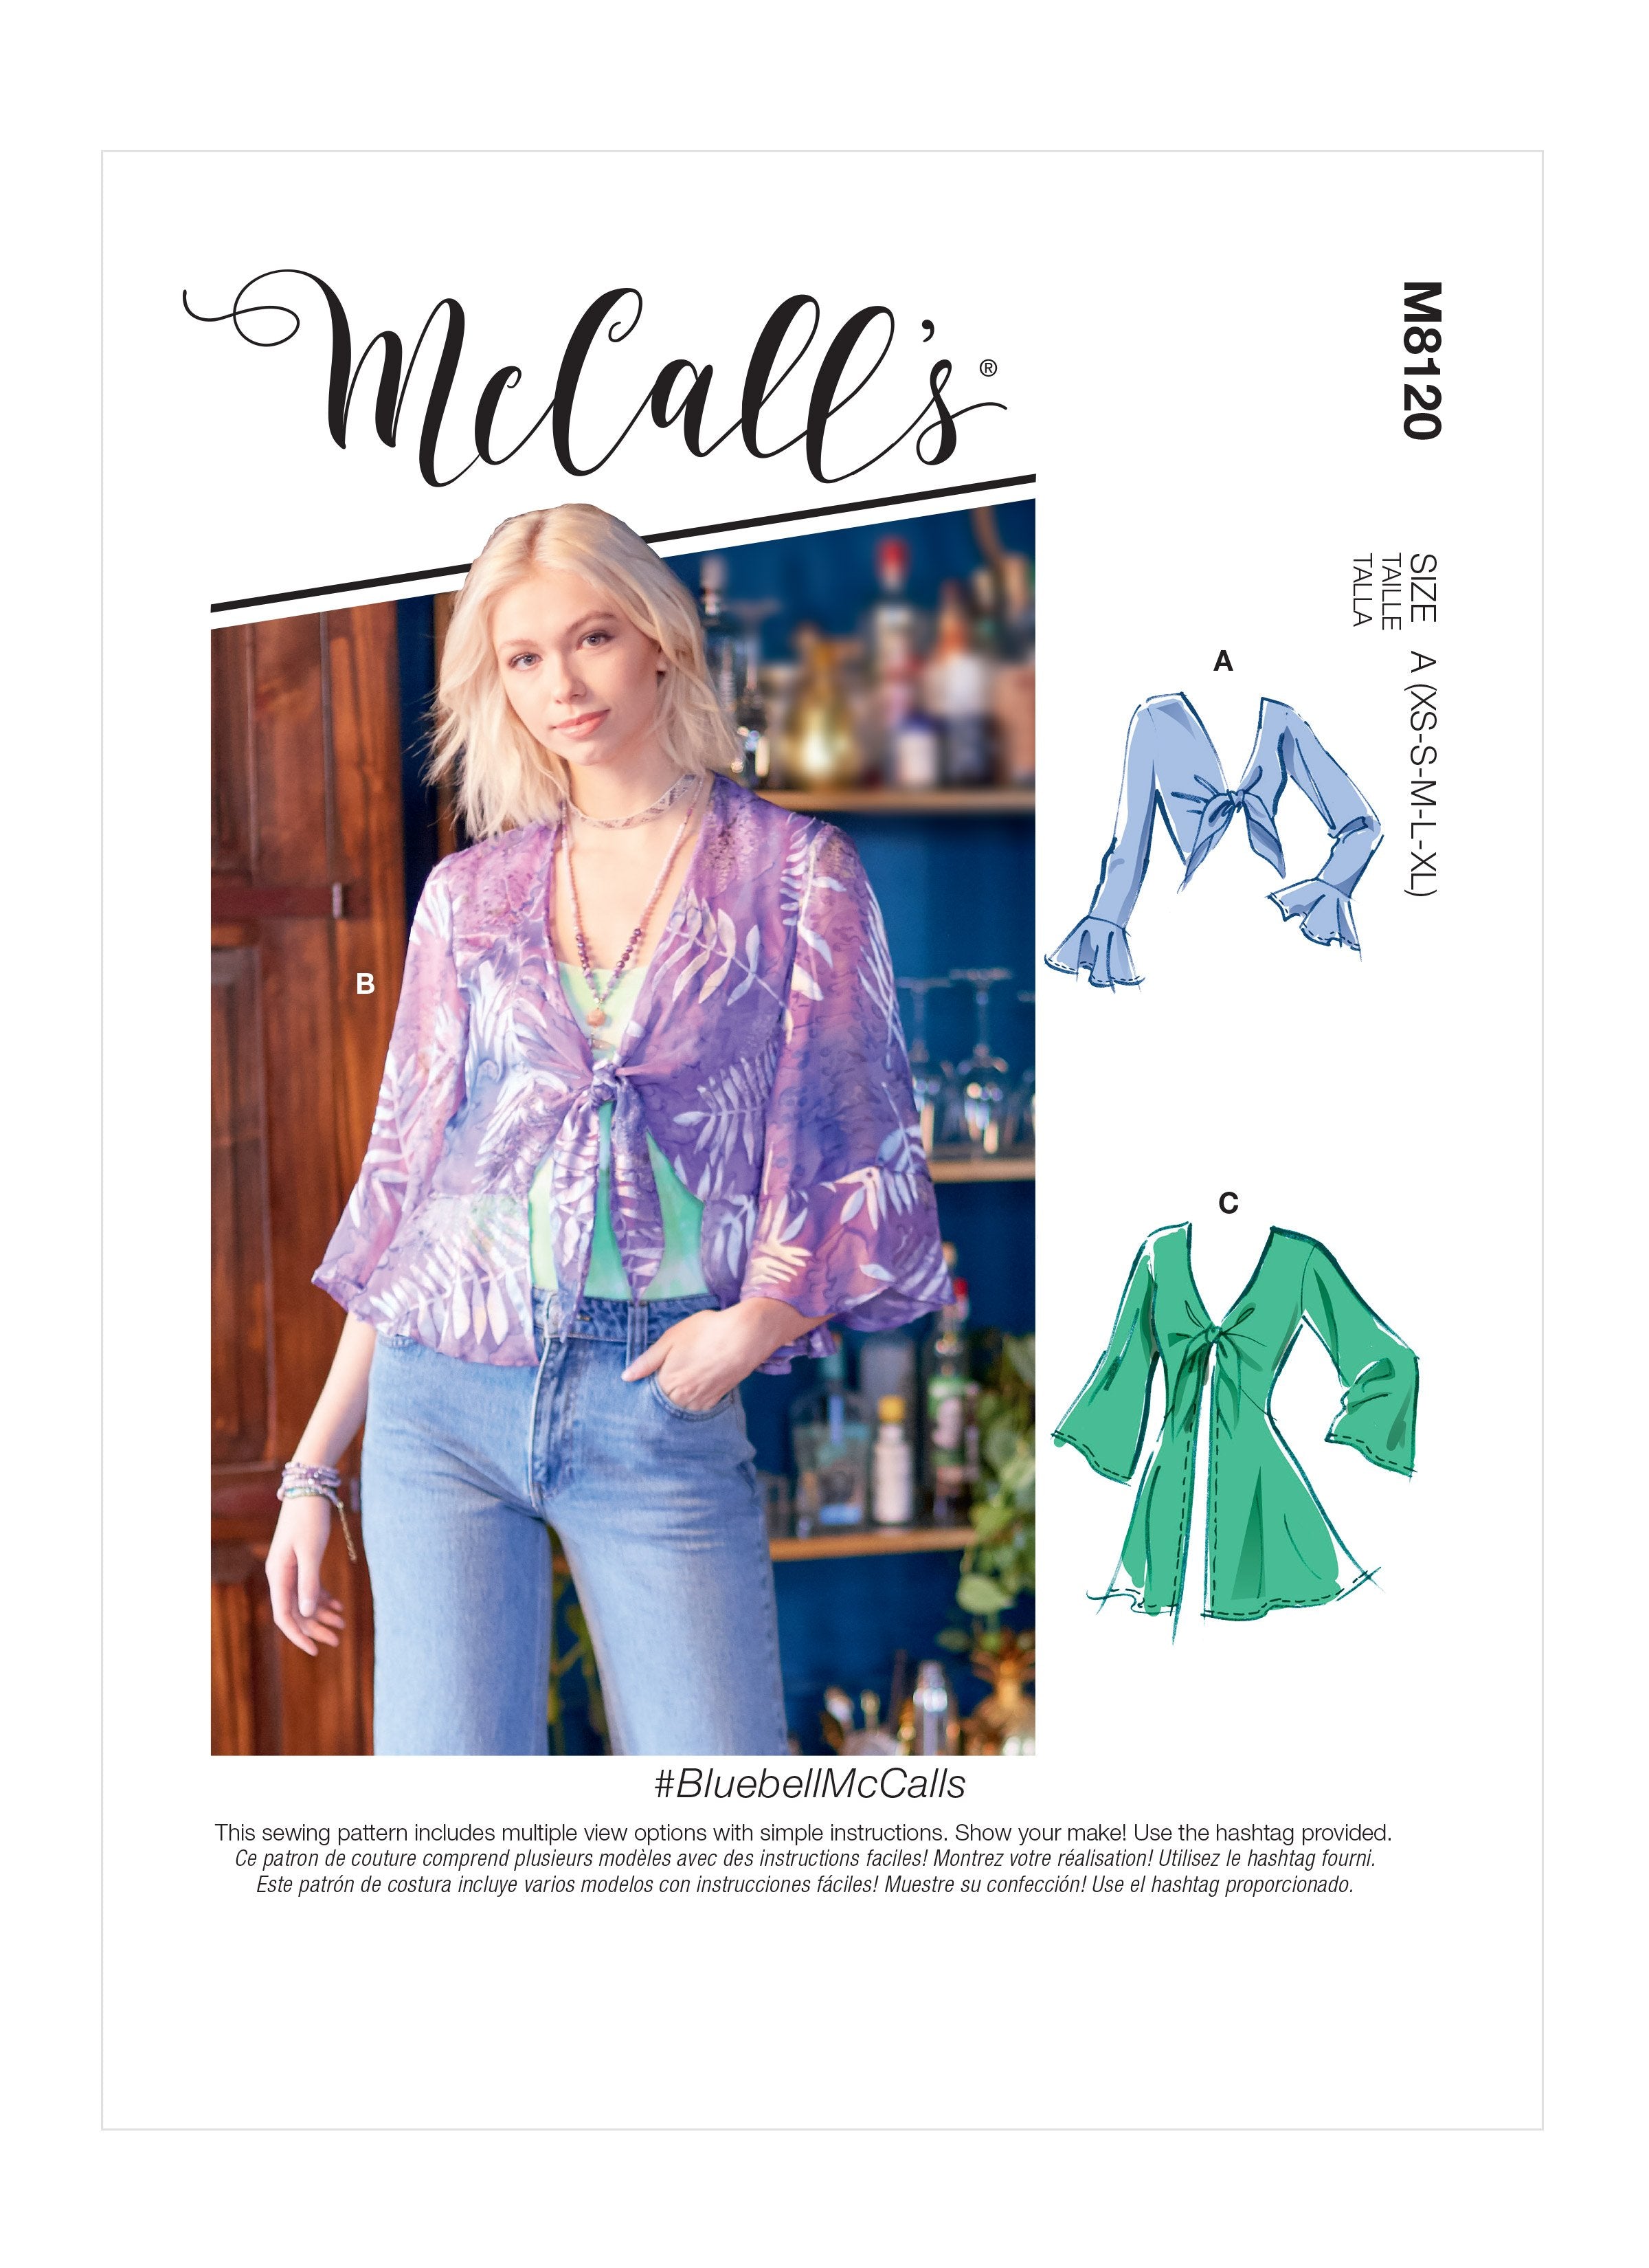 McCall's 8120 Jackets sewing pattern #BluebellMcCalls from Jaycotts Sewing Supplies